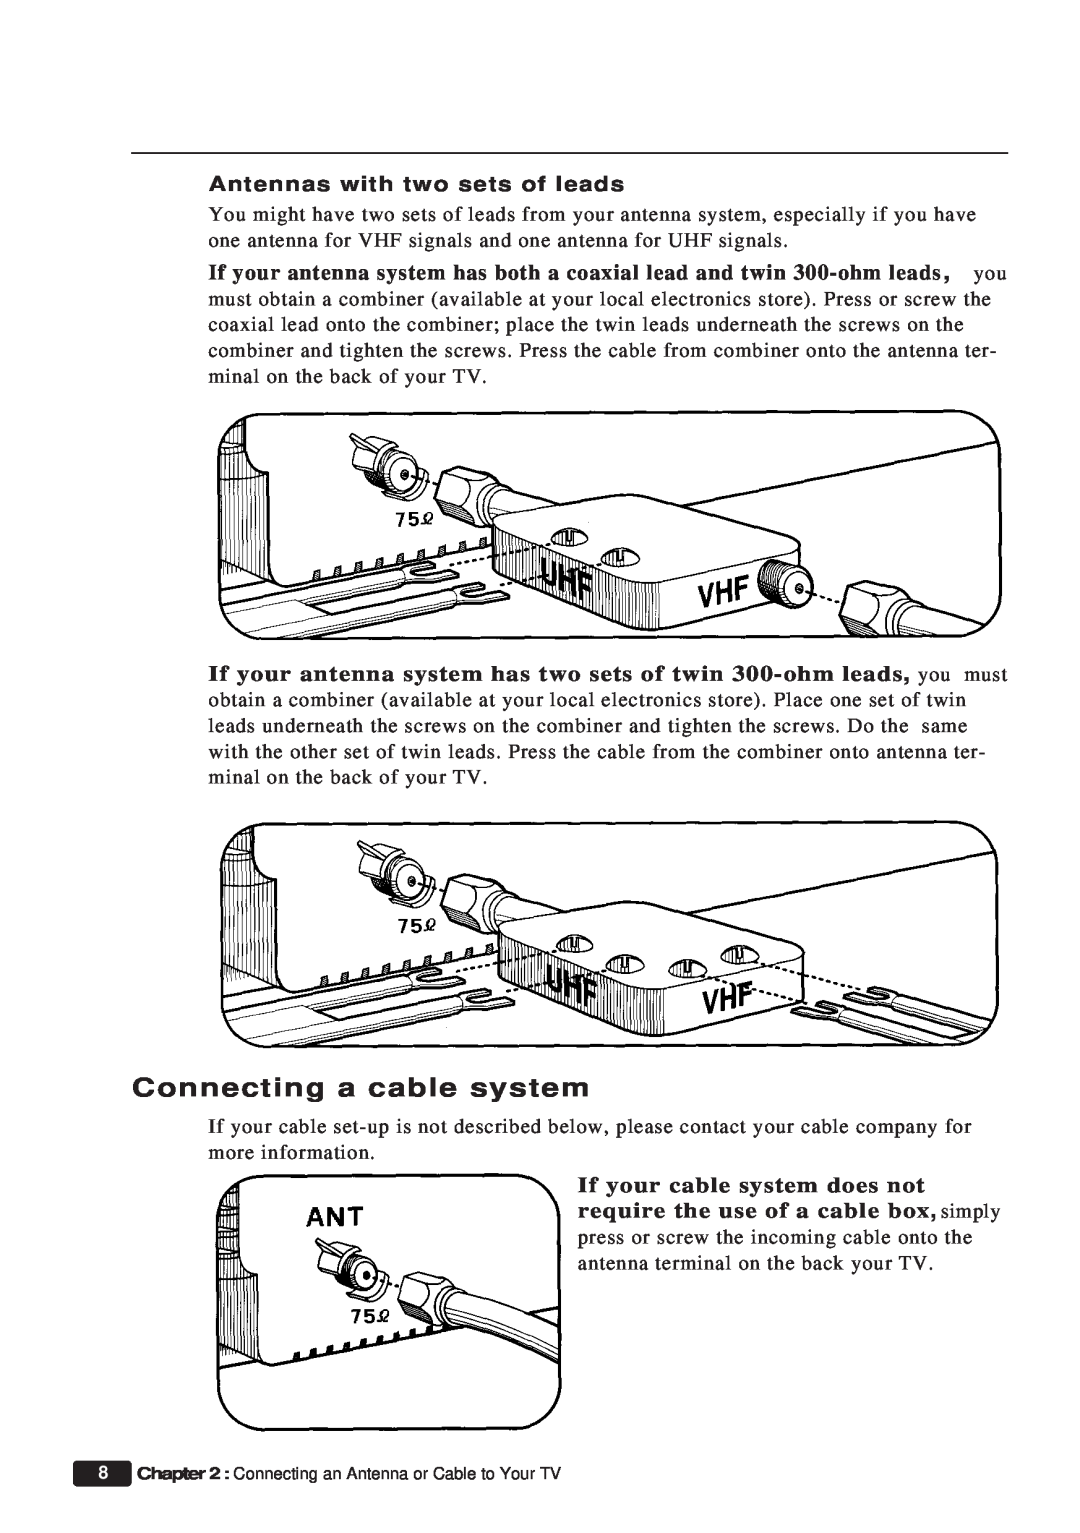 Daewoo ET 13P2, ET 19P2 instruction manual Connecting a cable system, Antennas with two sets of leads 